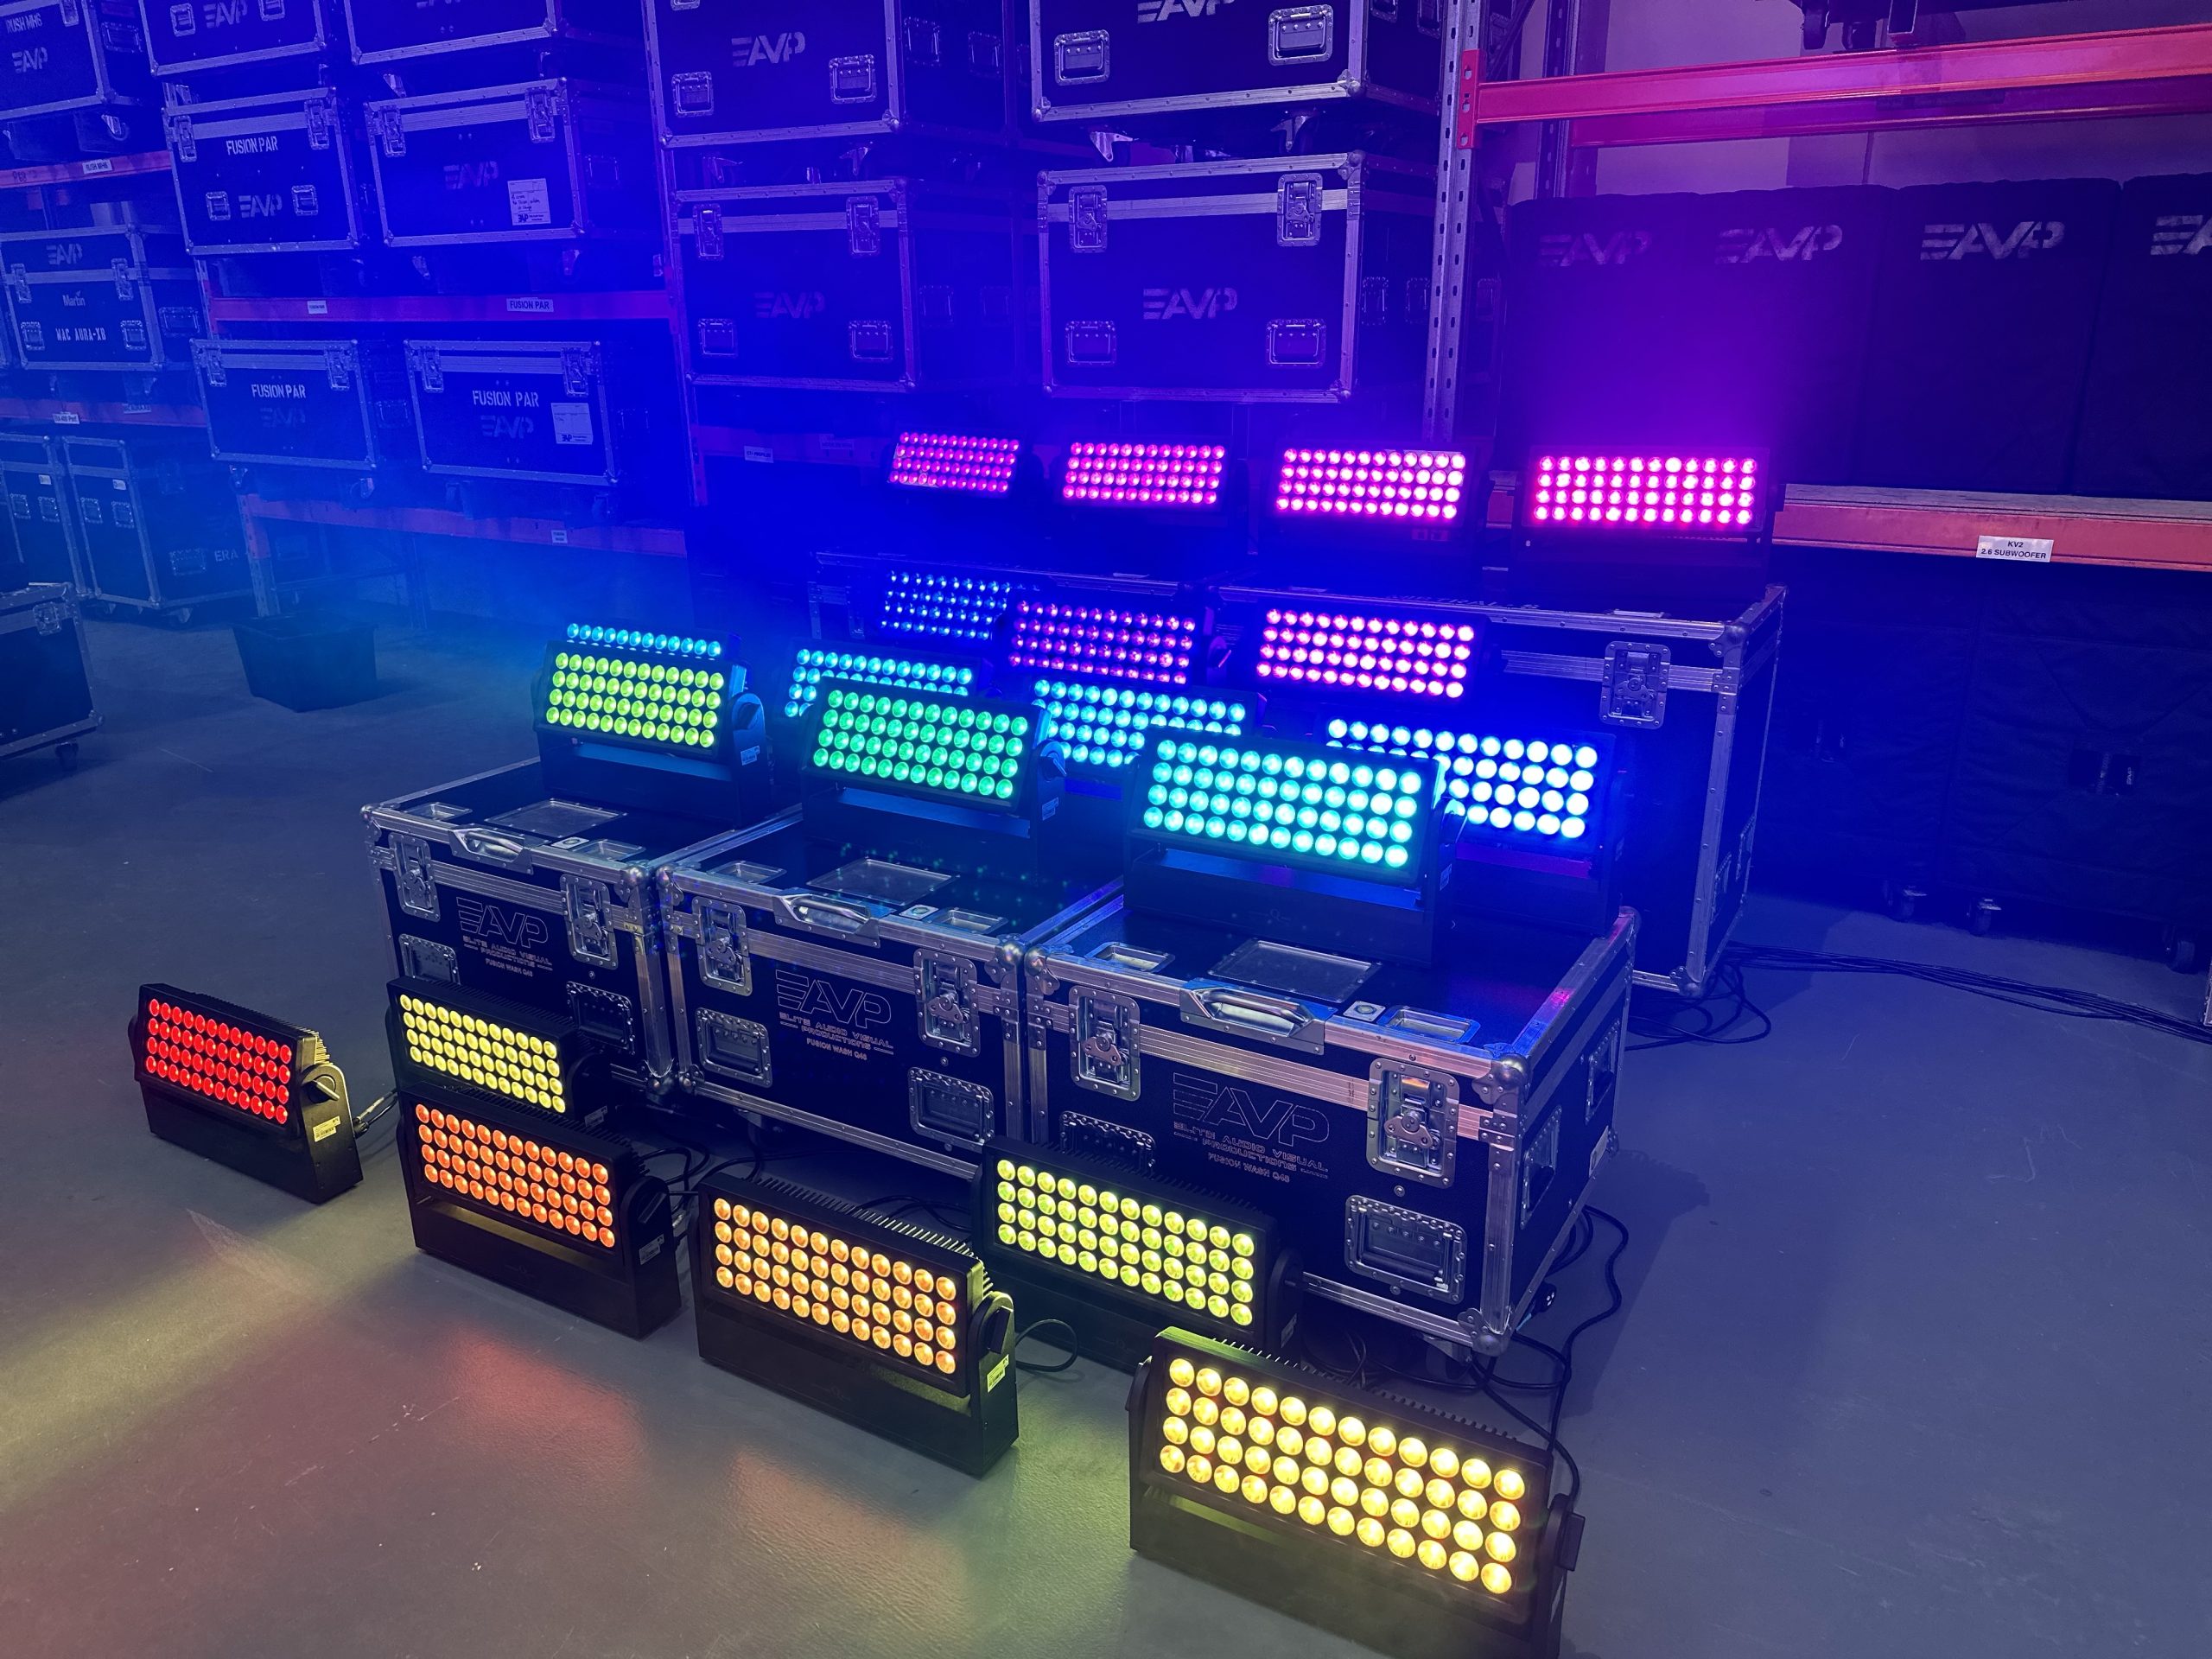 Elite Audio Visual Productions: Pioneering the Future with Cutting-Edge Technology